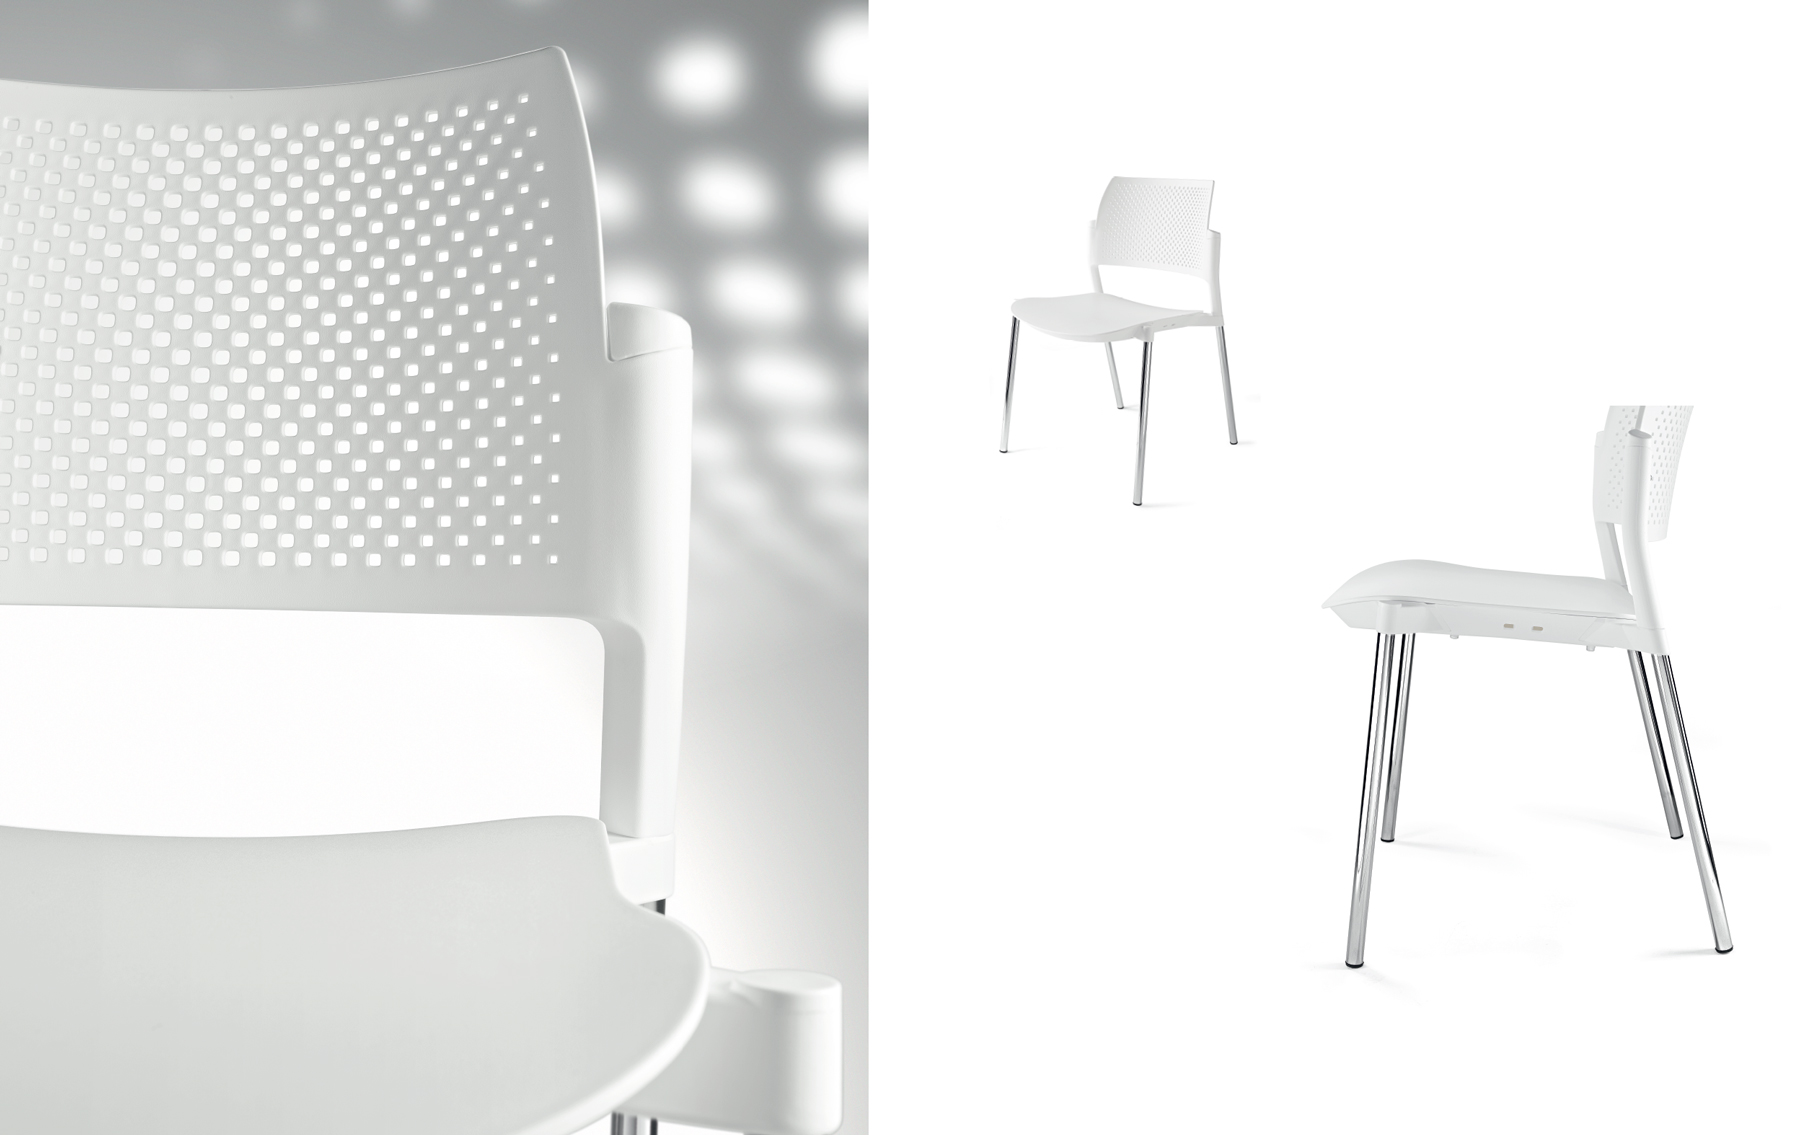 Kyos - Meeting, conference and waiting room chairs - Cerantola - 2